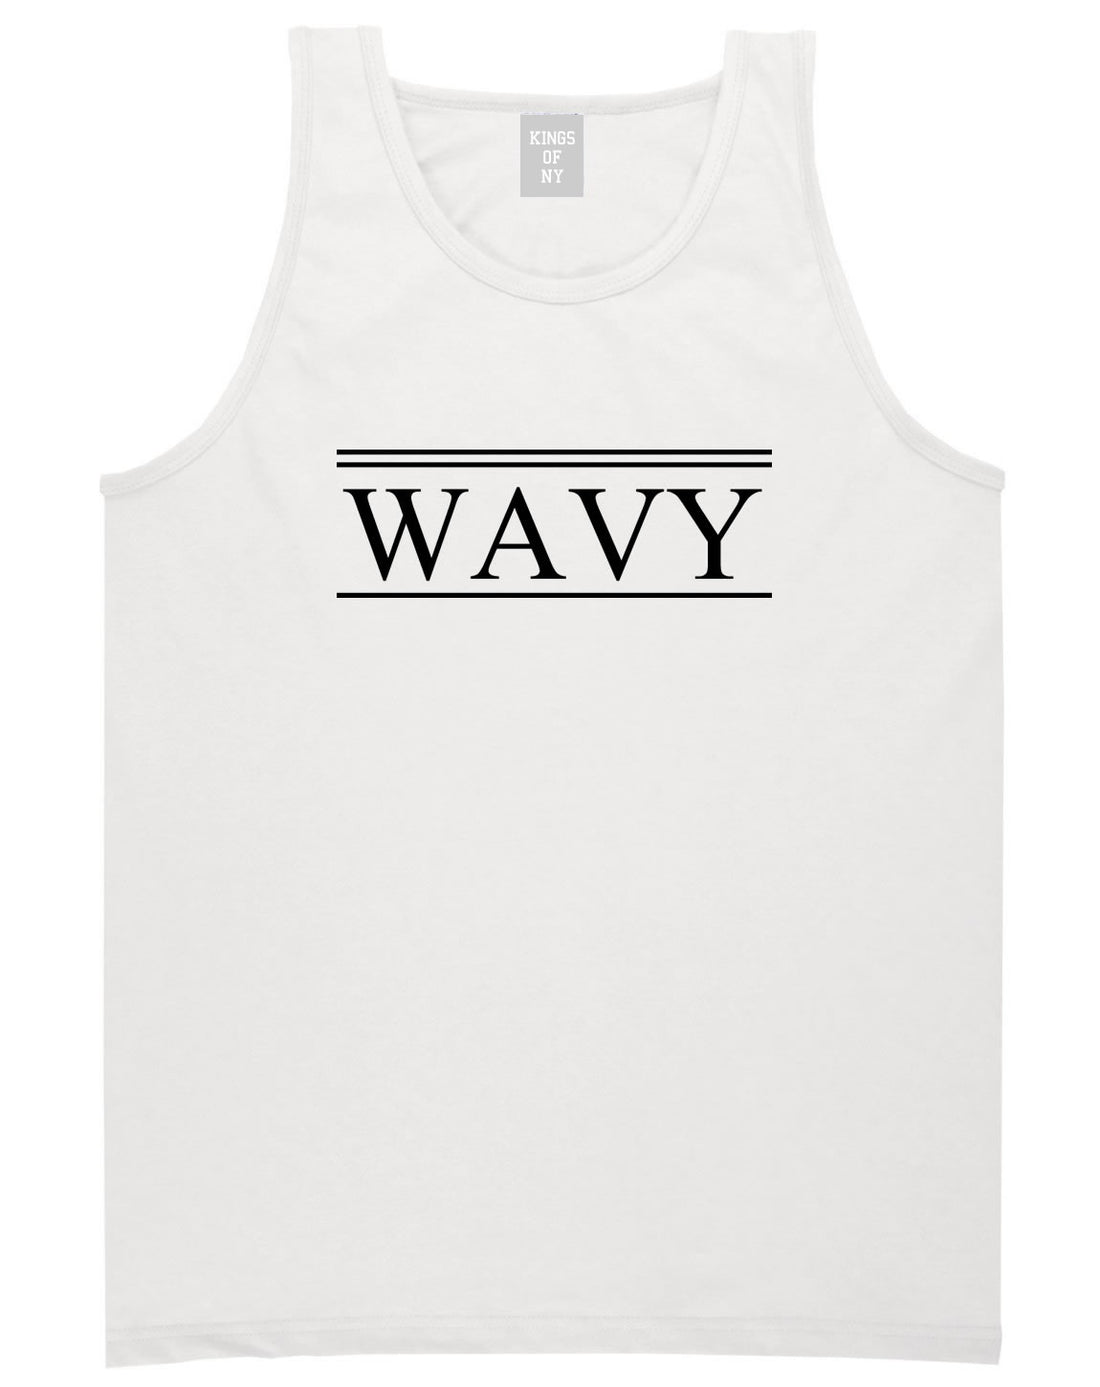 Wavy Harlem Tank Top in White By Kings Of NY